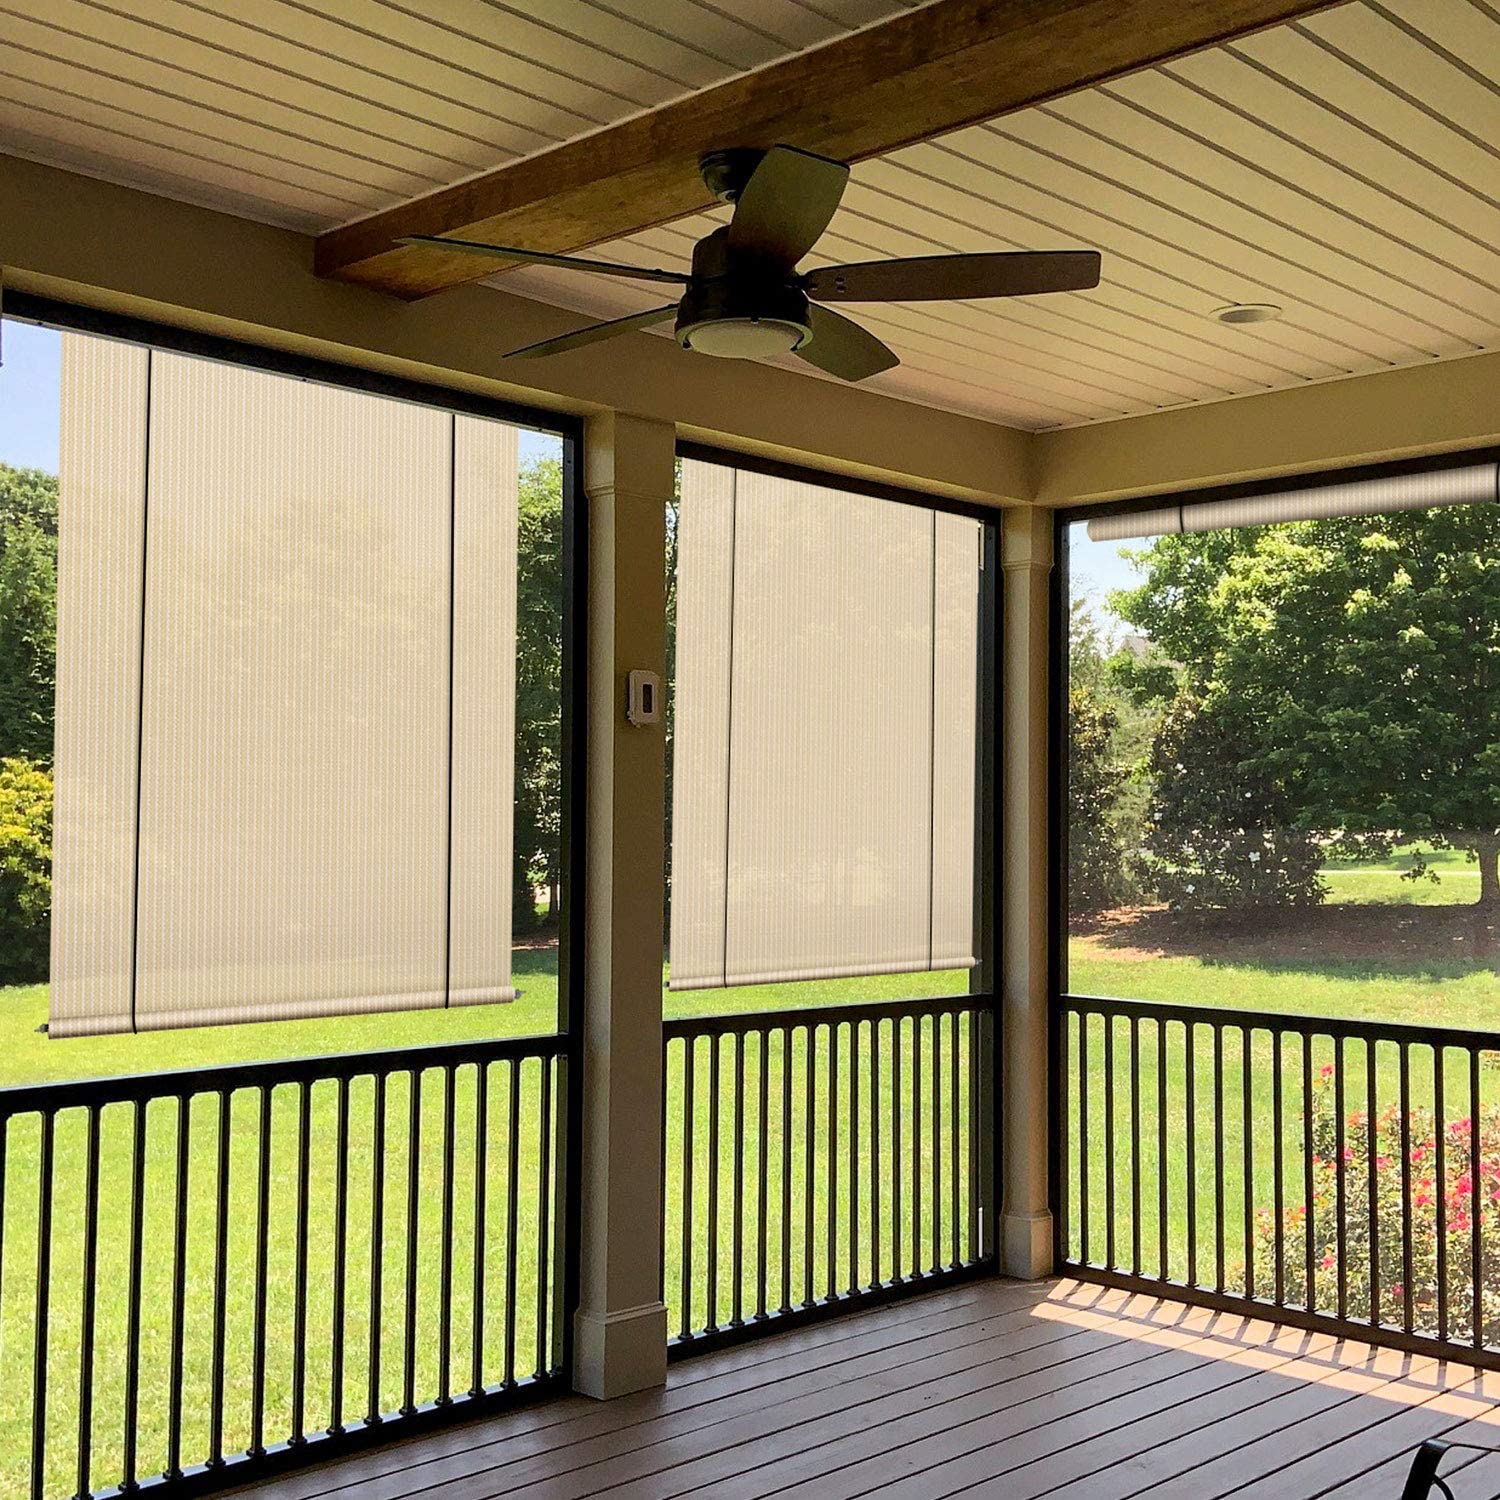 Amazon.com : Coarbor Outdoor Roll up Shades Blinds for Porch Patio ...